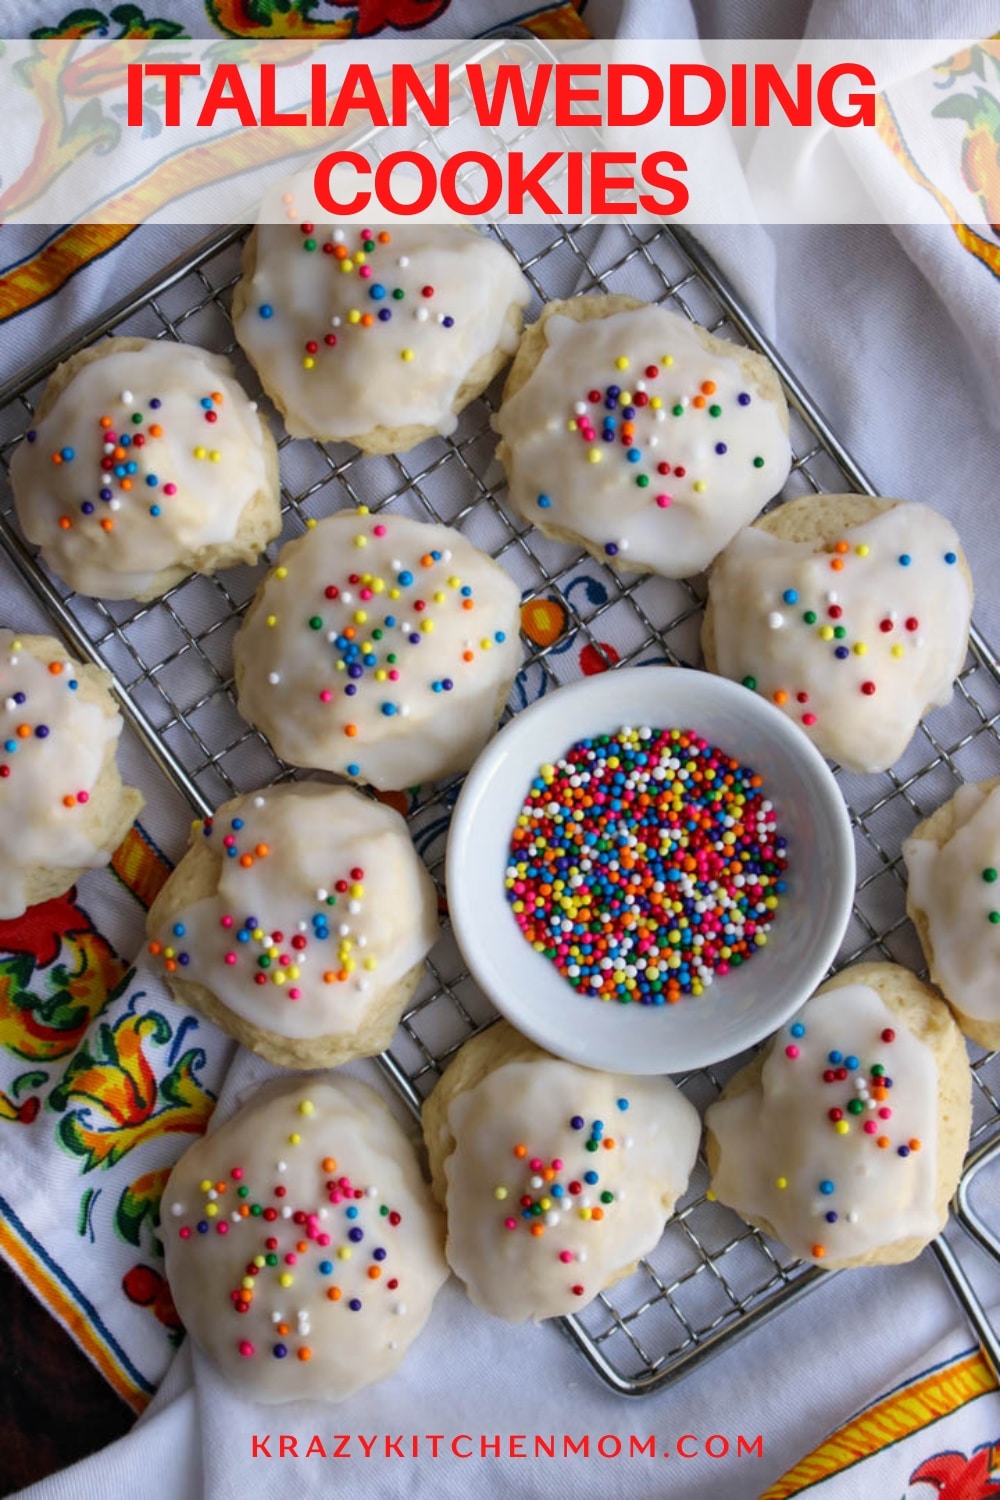 These cookies are soft and pillowy with an almond flavor. They are dipped in a creamy almond glaze and topped with fun and colorful sprinkles. via @krazykitchenmom